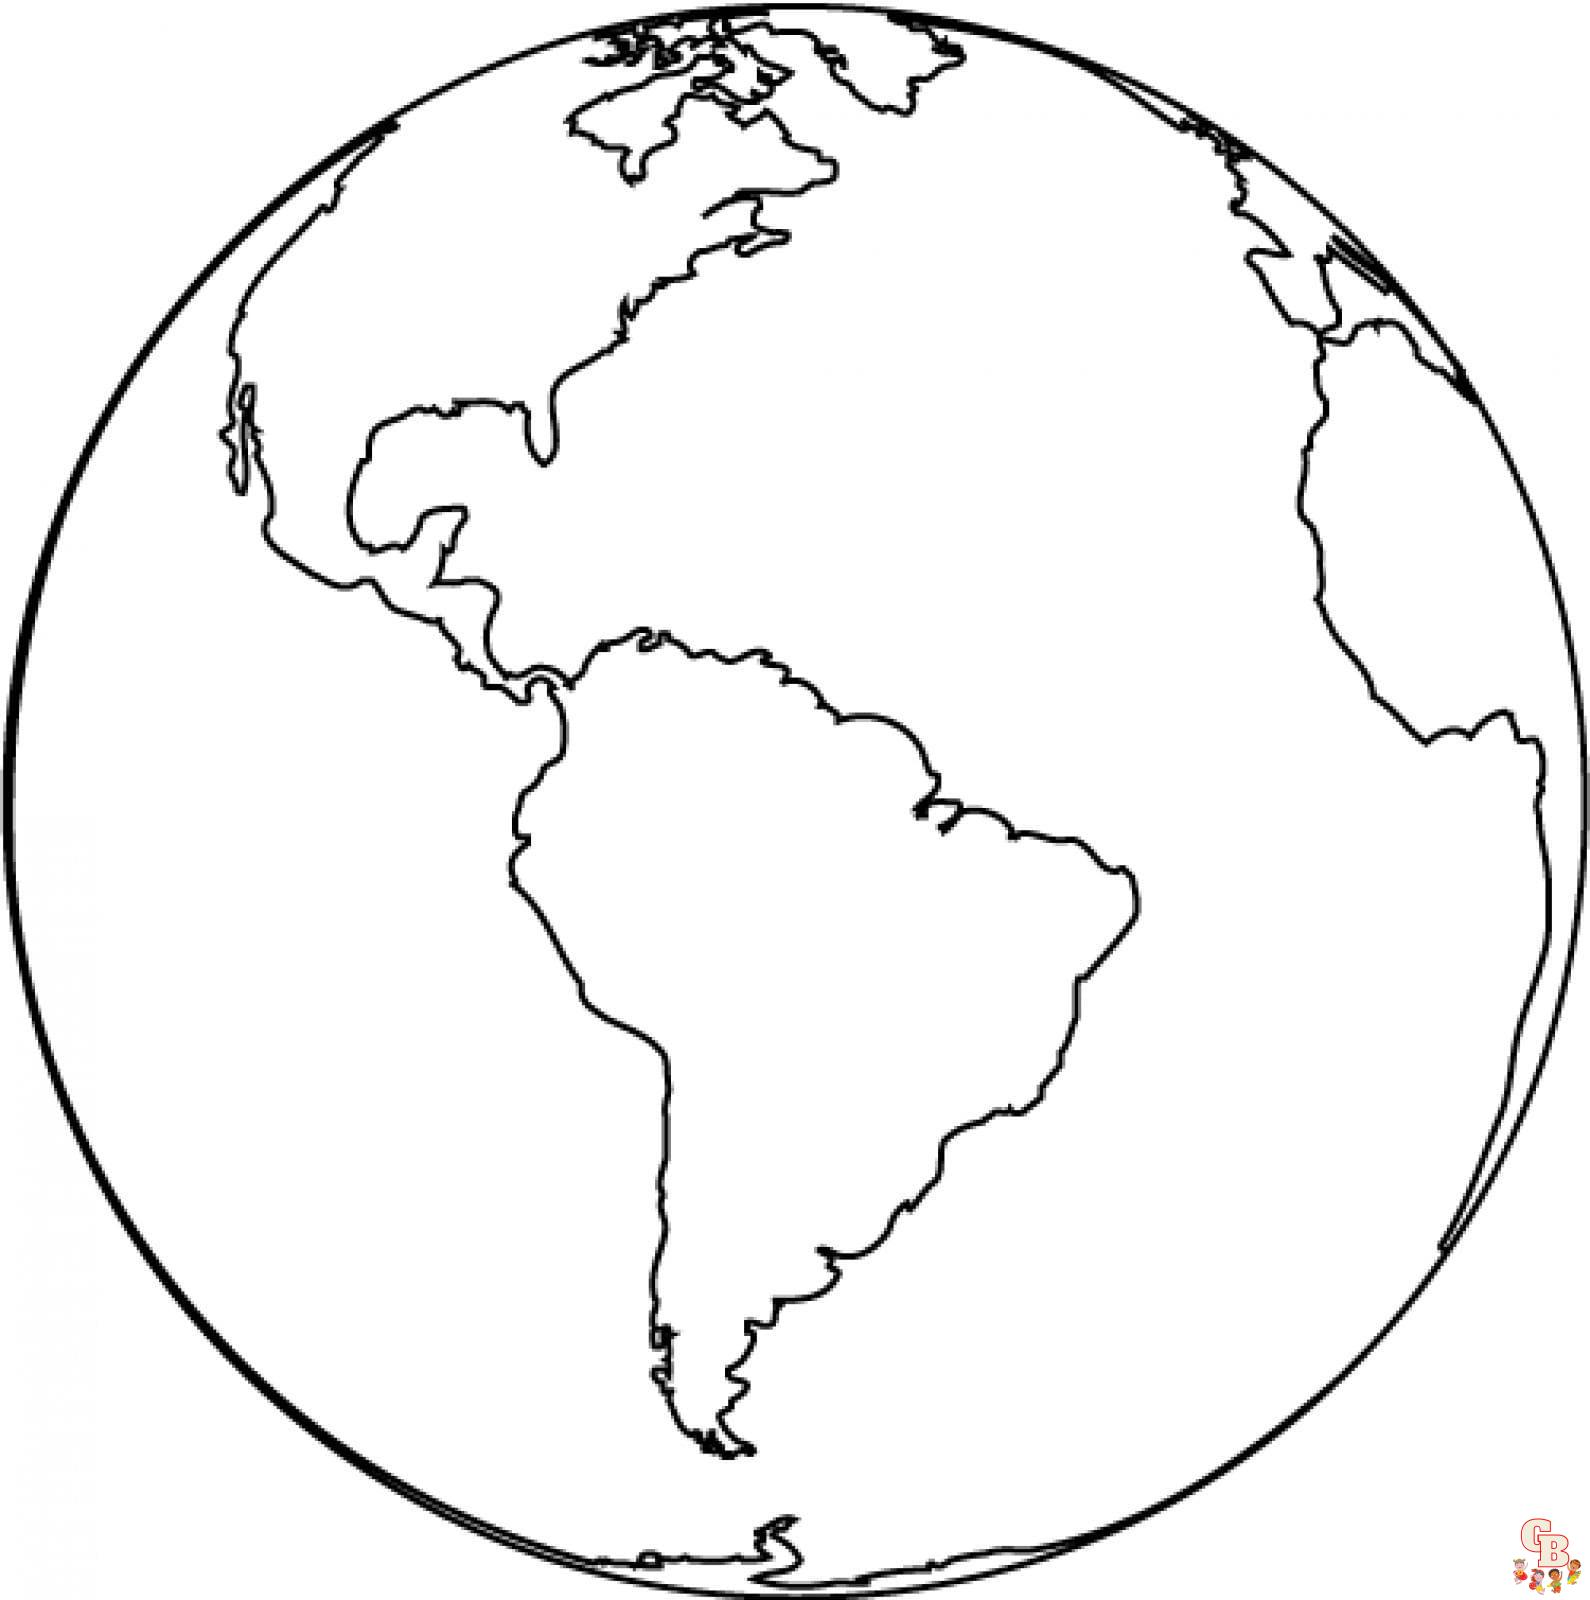 Free Earth coloring pages for kids